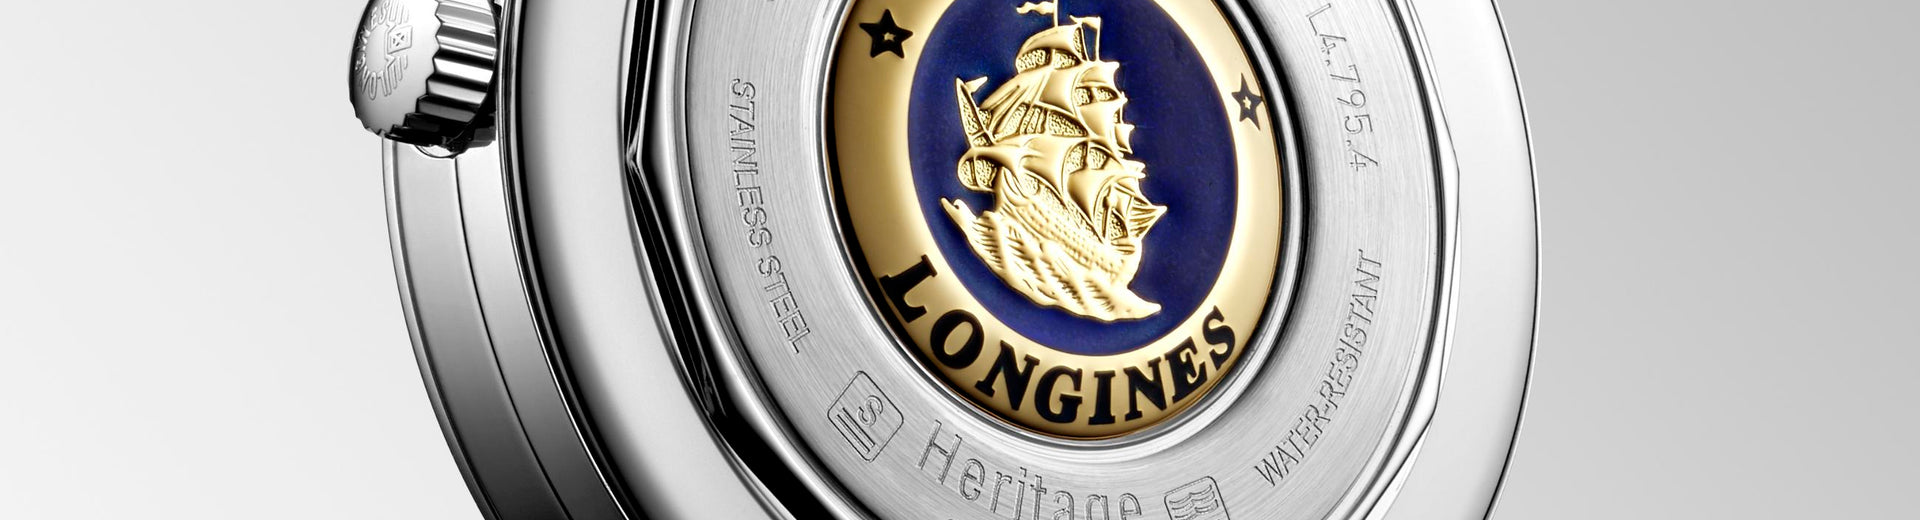 Longines Flagship Heritage Watch L4.795.4.58.0